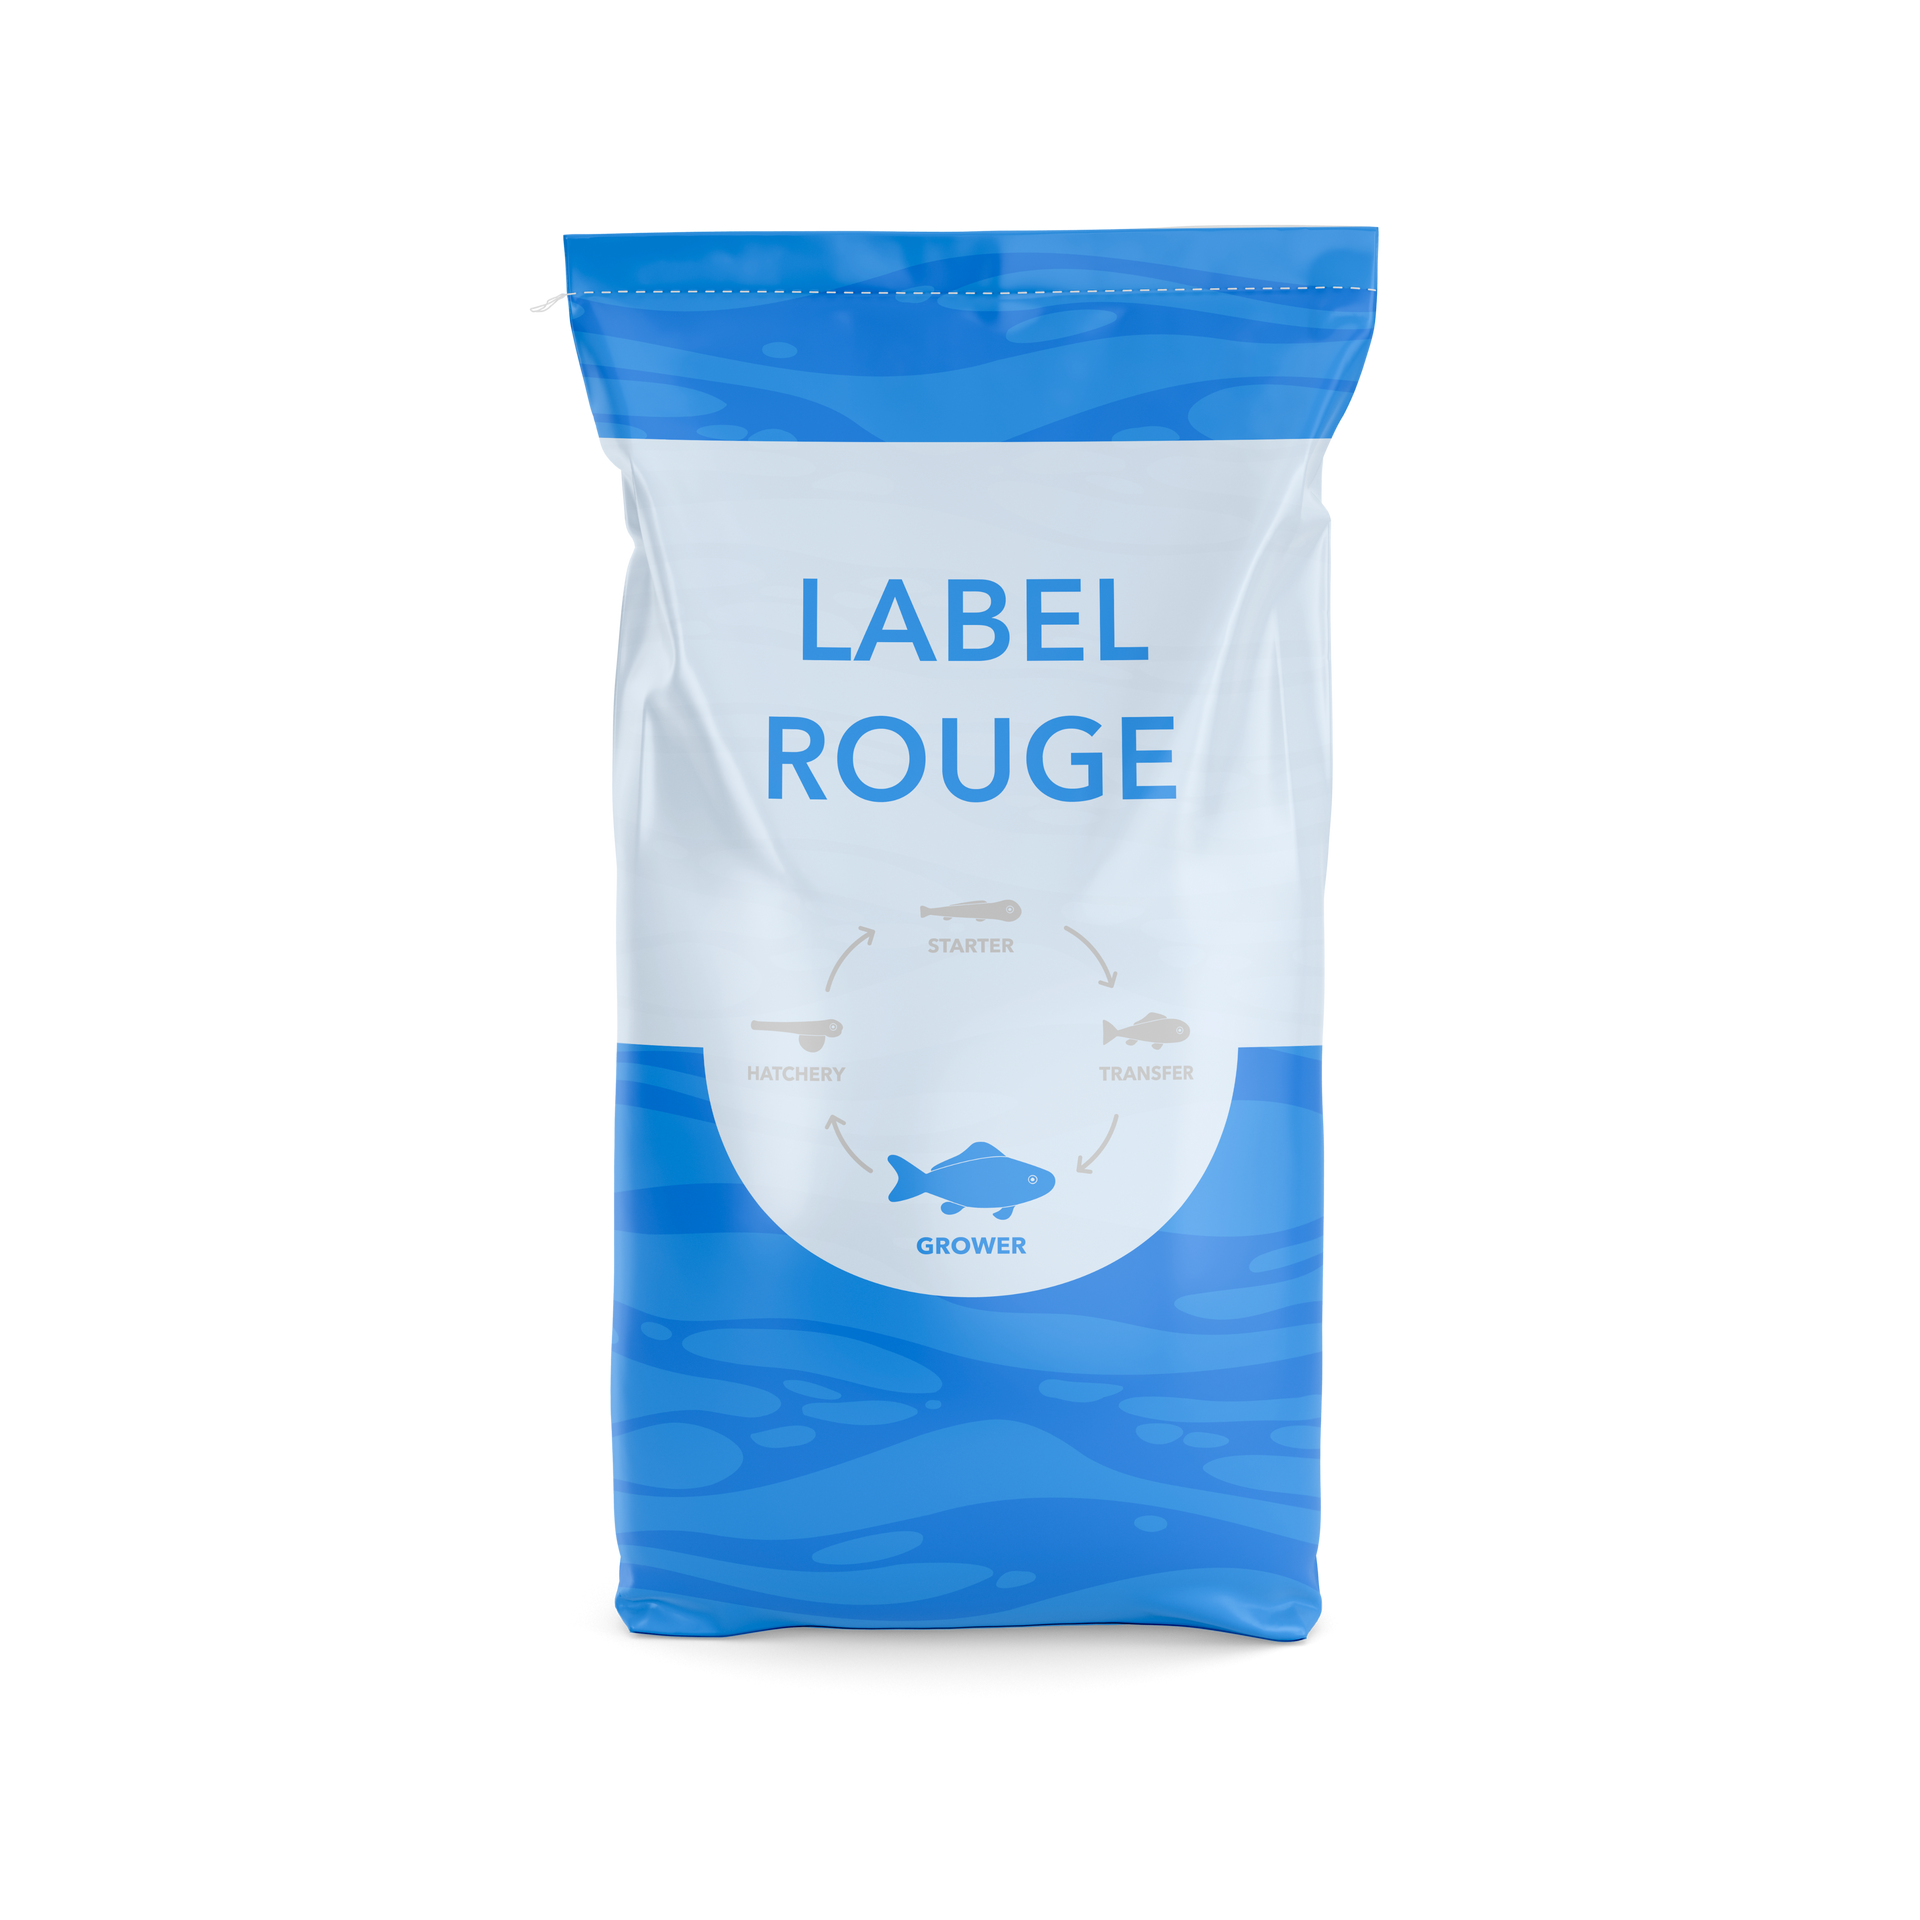 Label Rouge high performance salmon feed